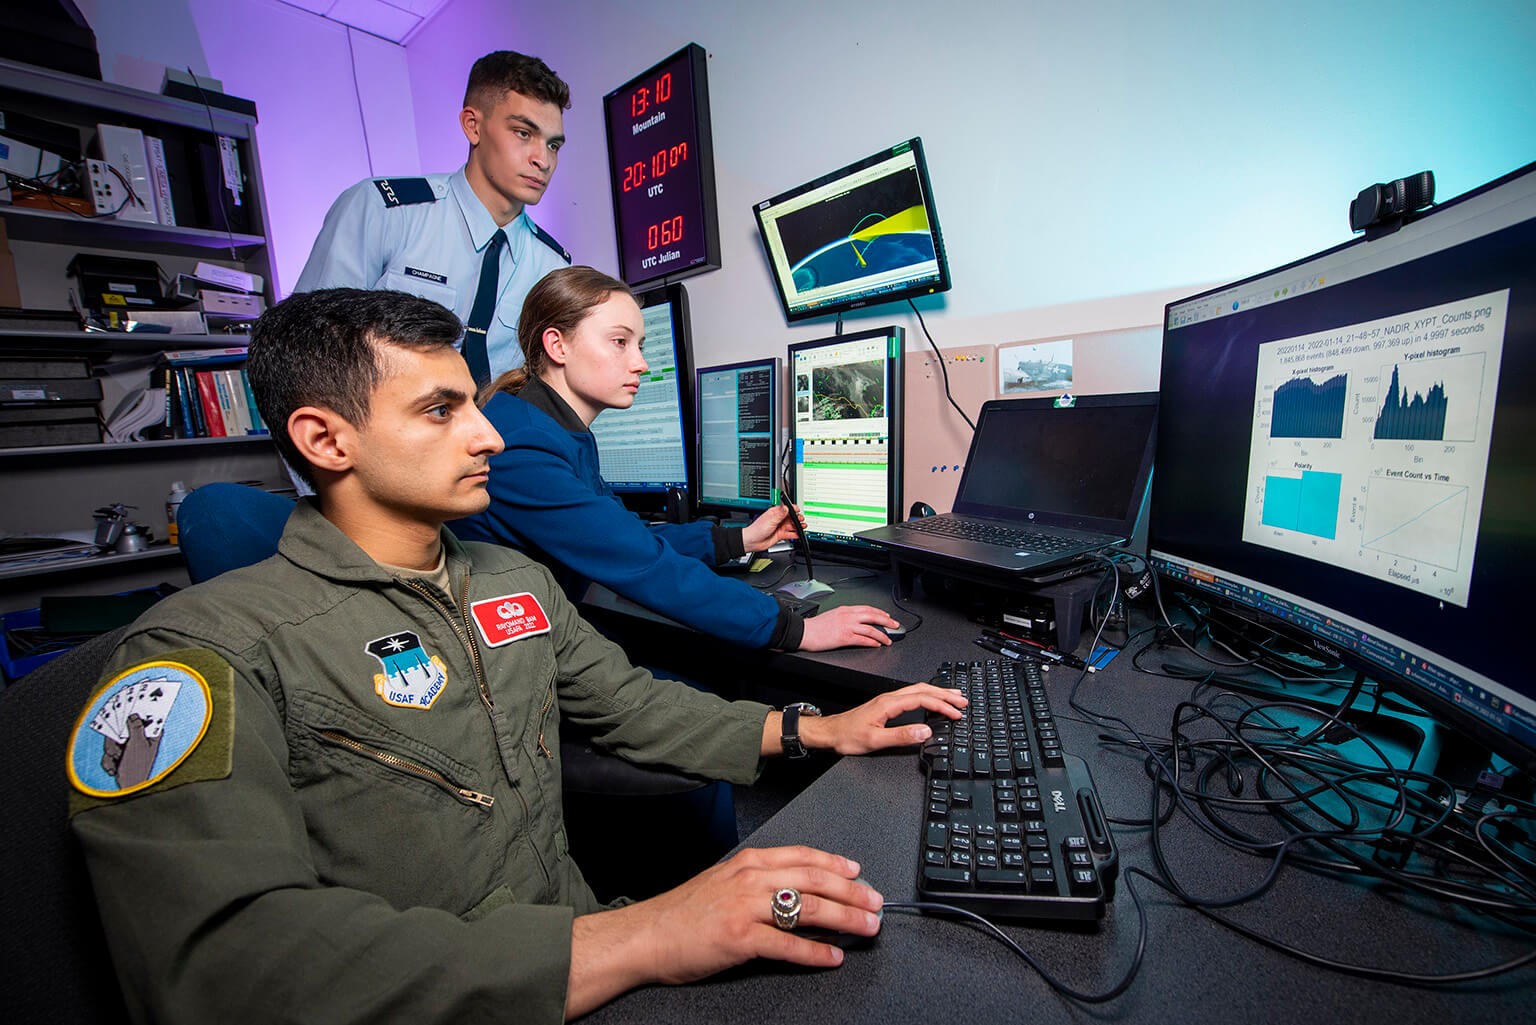 Cadets Liam Champagne, Kaylee King, and Rayomand Bam conduct data analysis in the SPARC’s data operations center on March 1, 2022